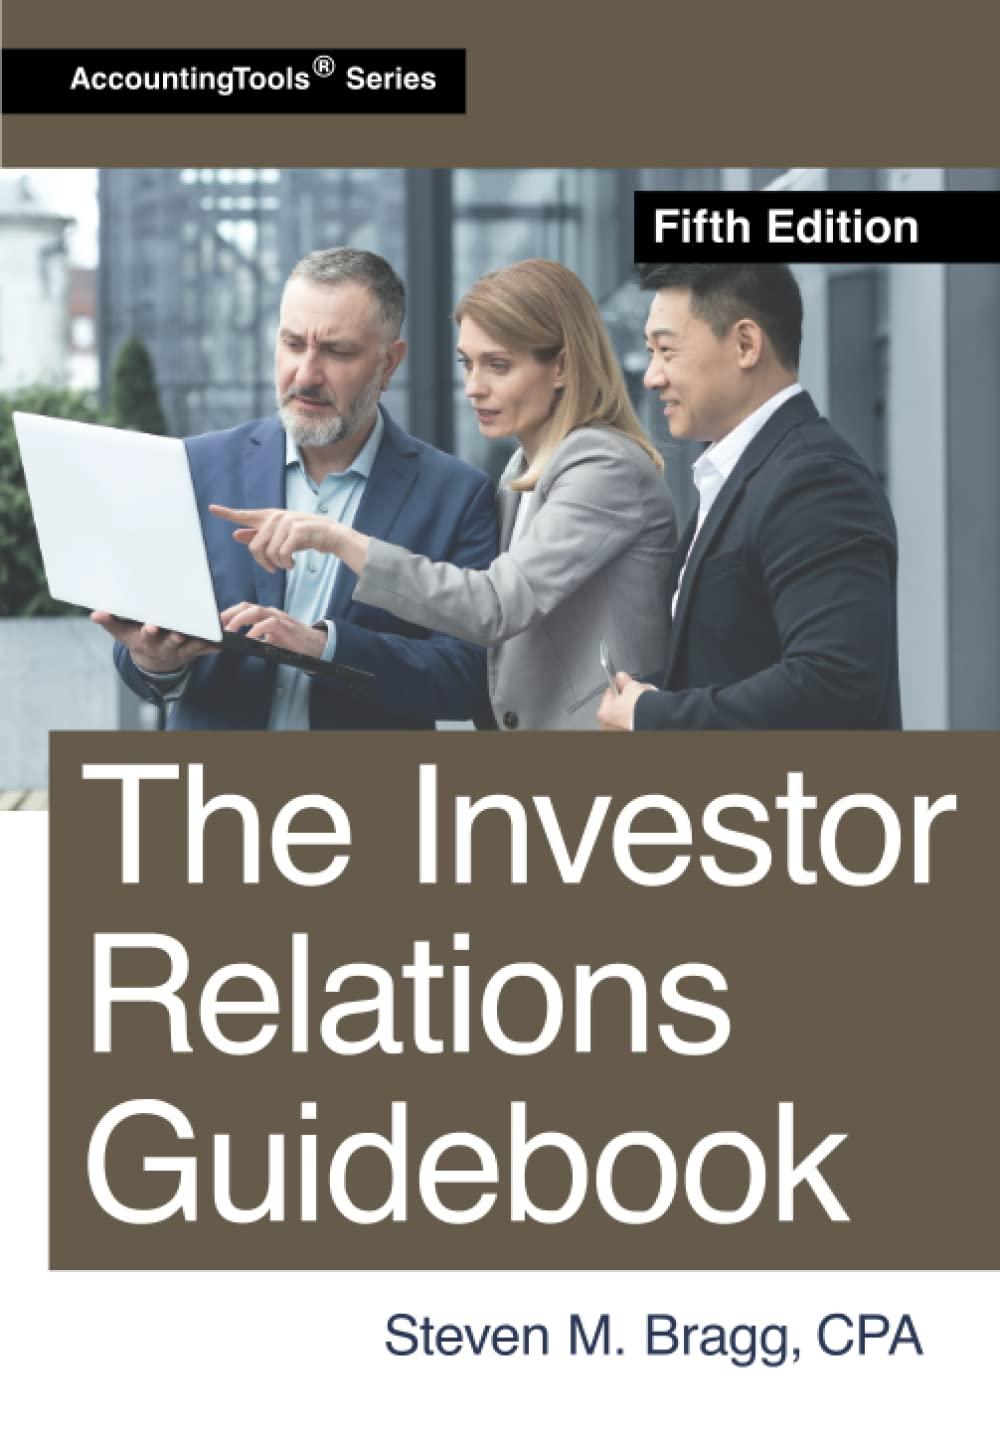 the investor relations guidebook 5th edition steven m. bragg 1642211001, 978-1642211009